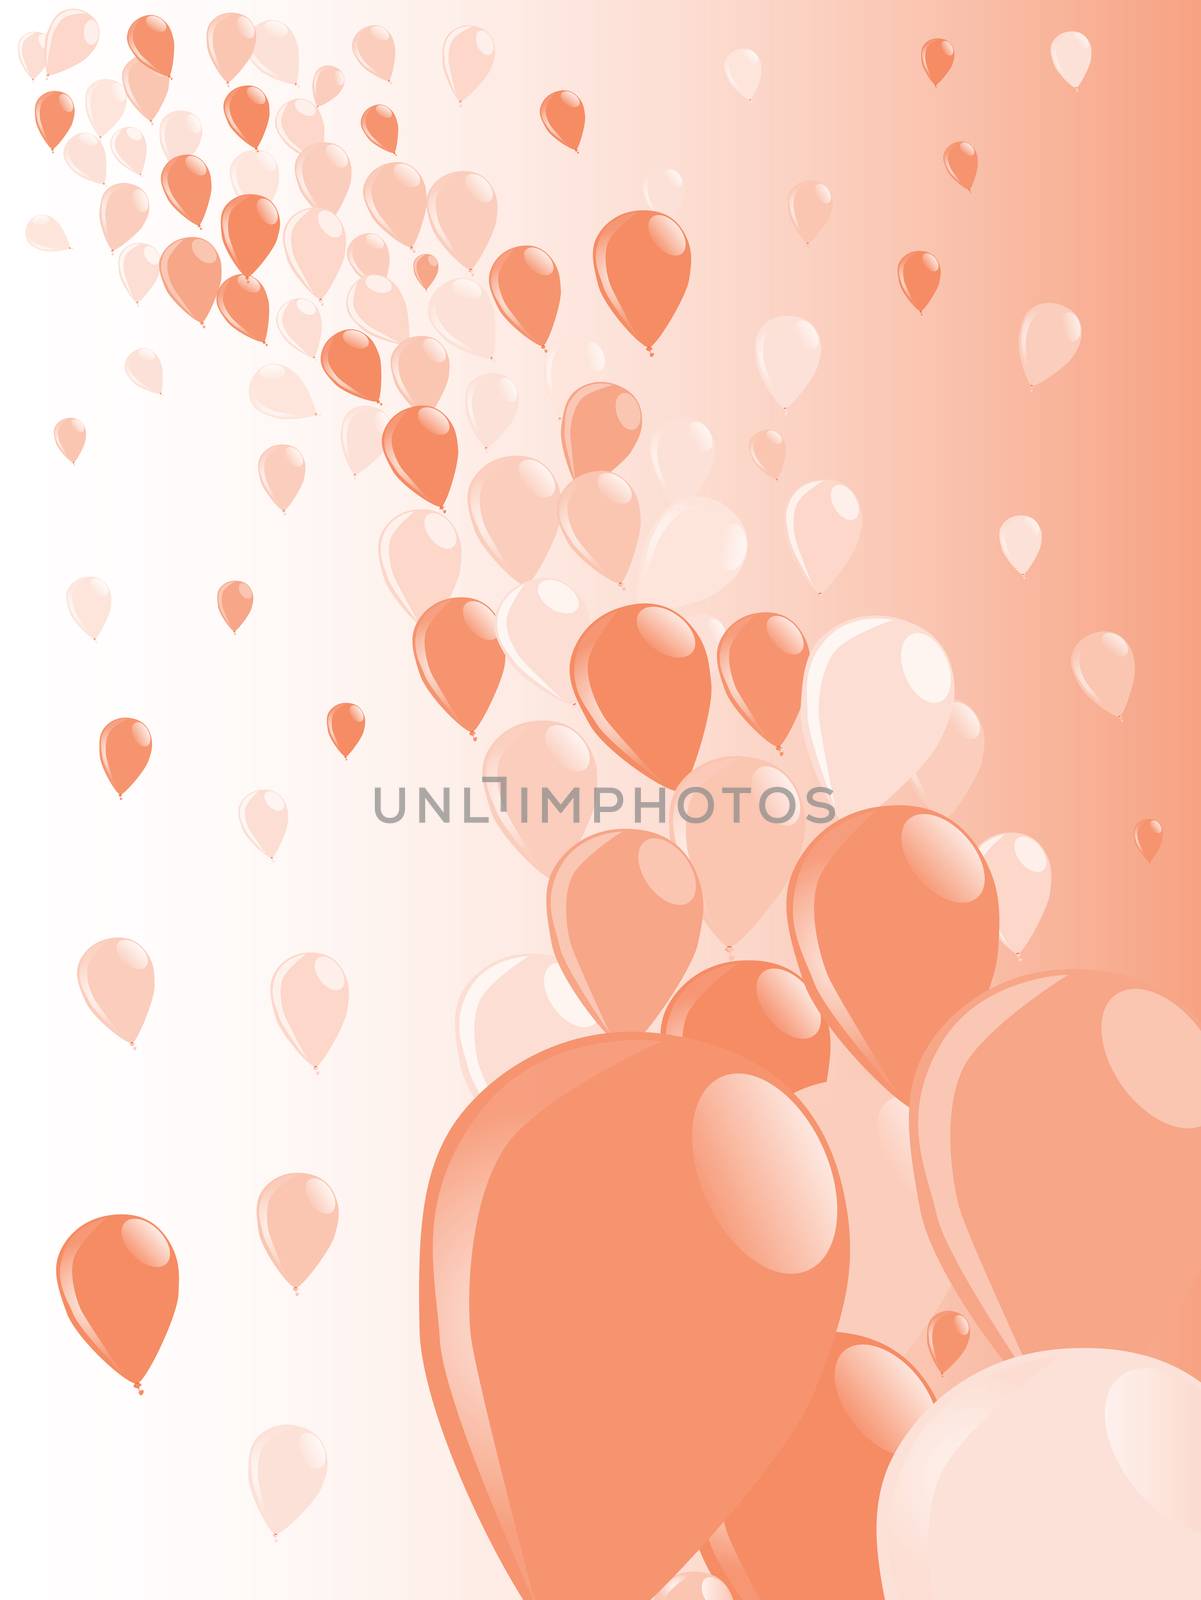 Baloons flying away into the sky over a white backgrounds